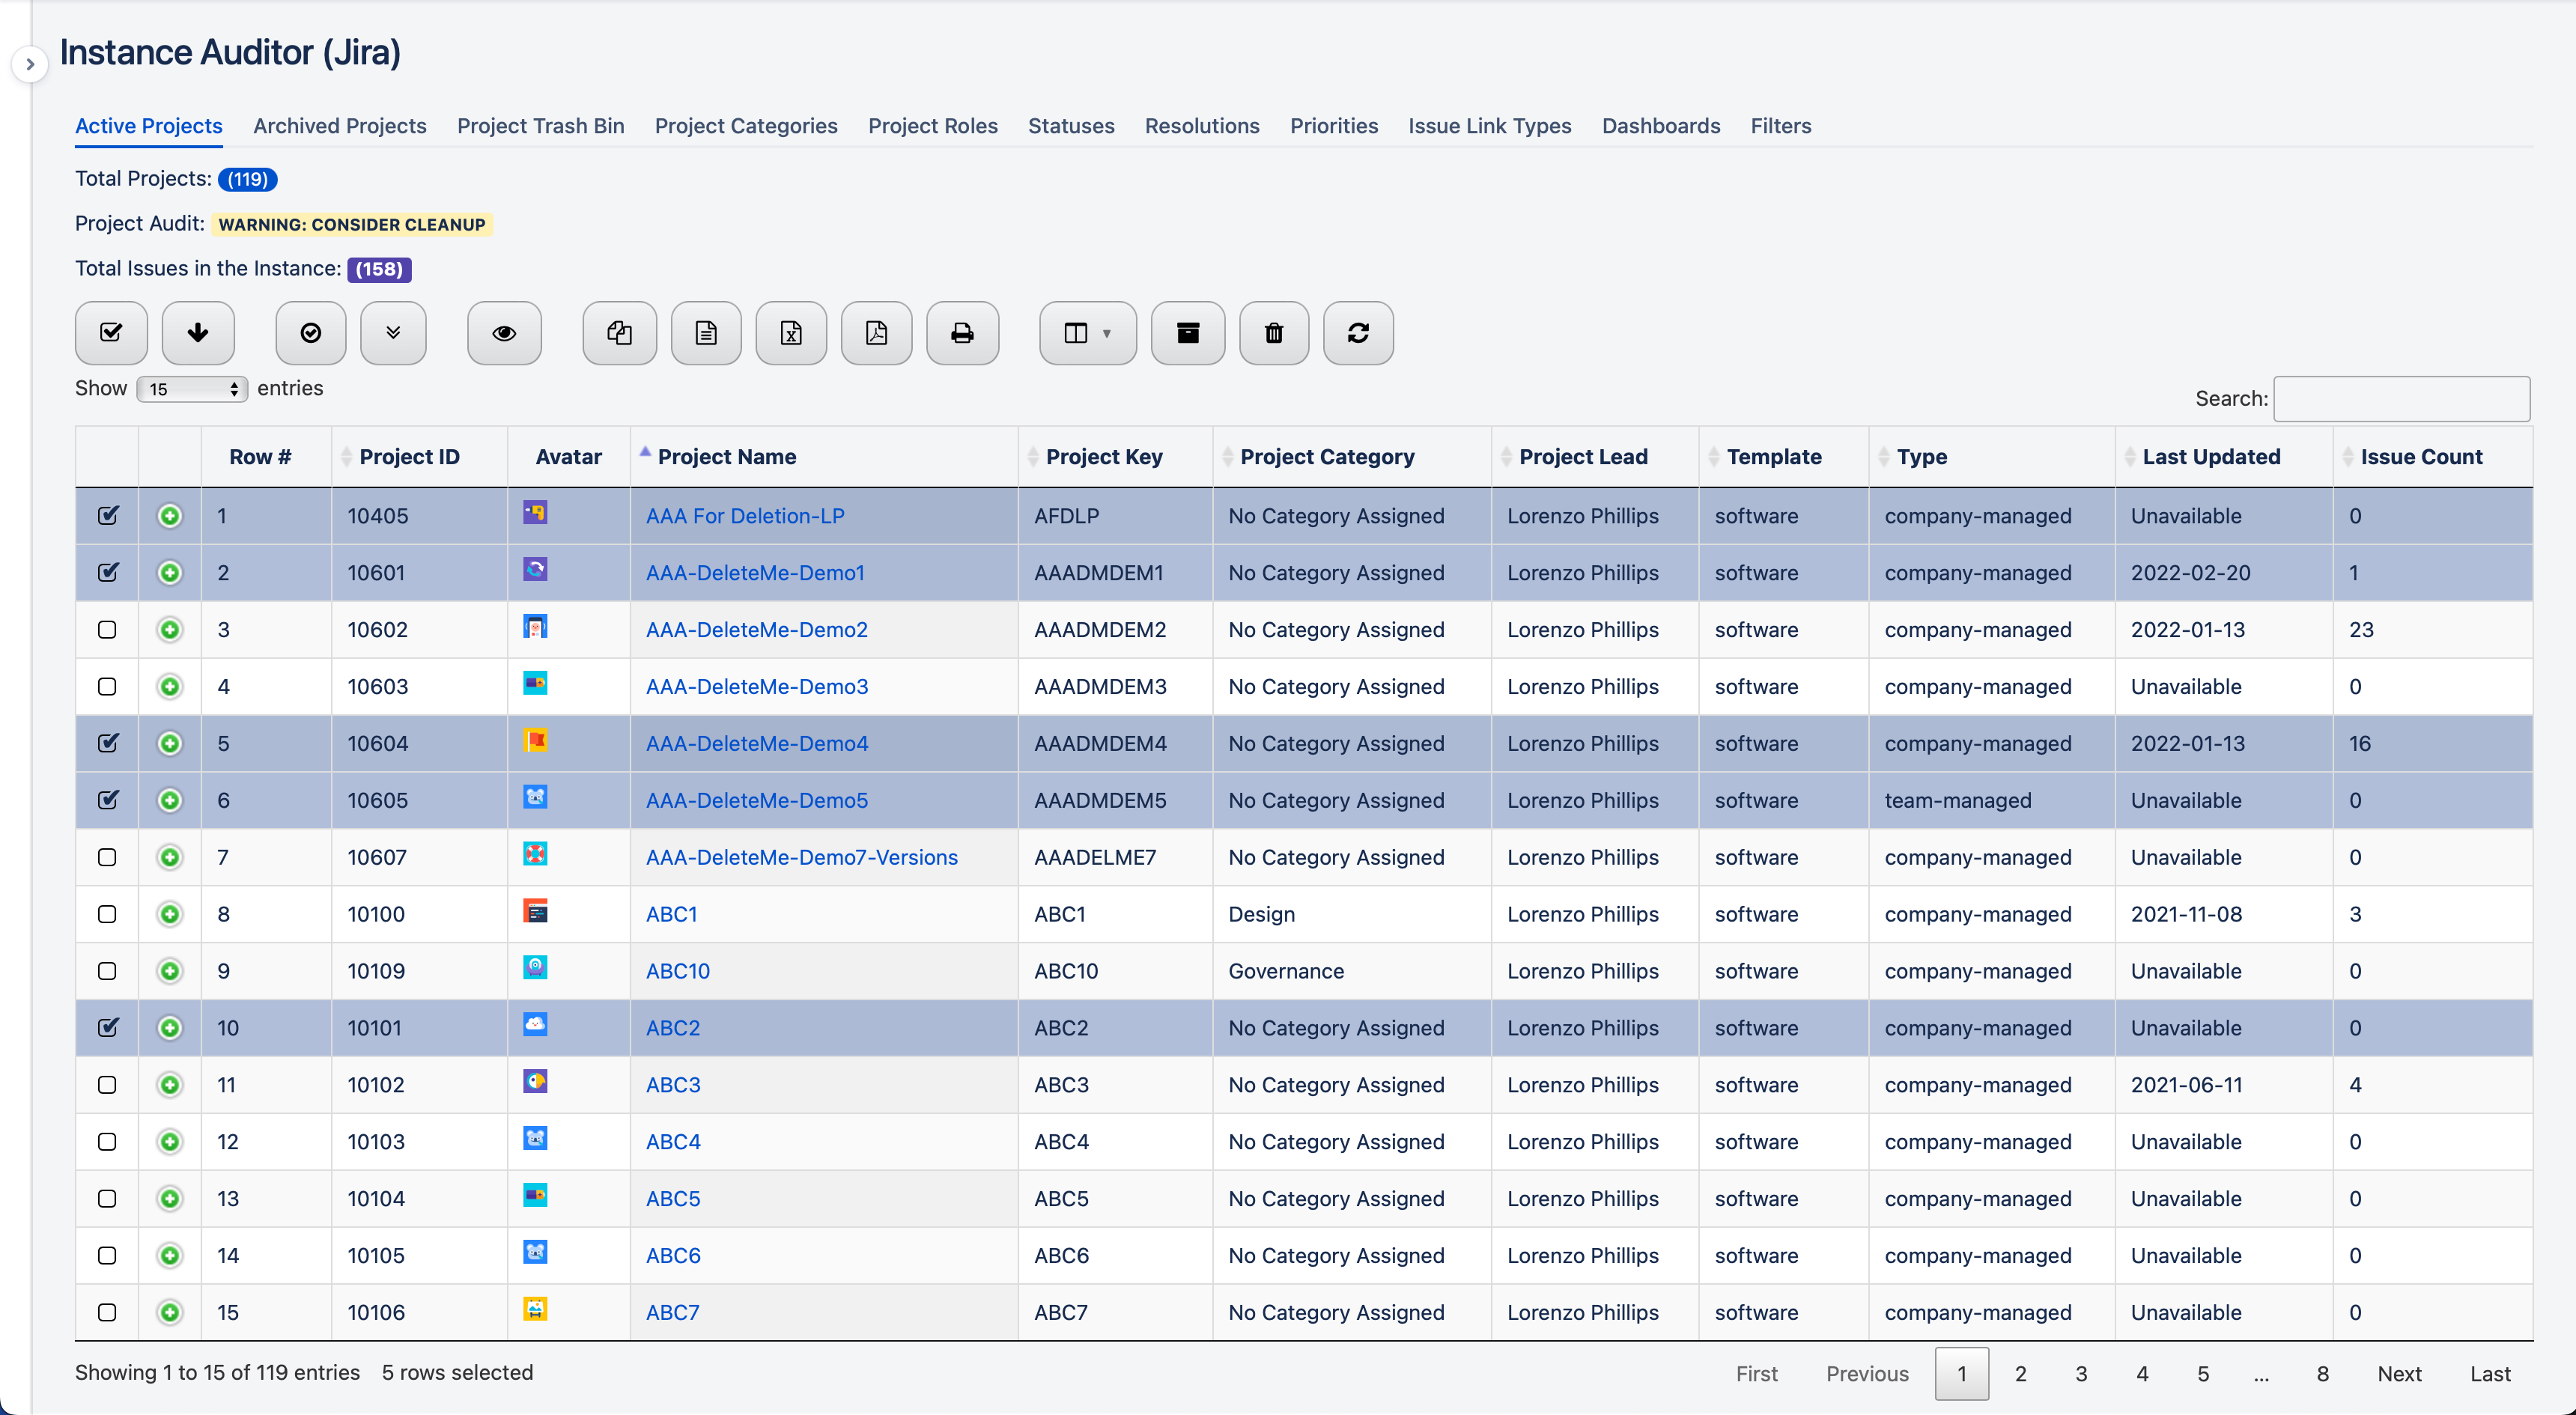 Instance Auditor (Jira) - Active Projects